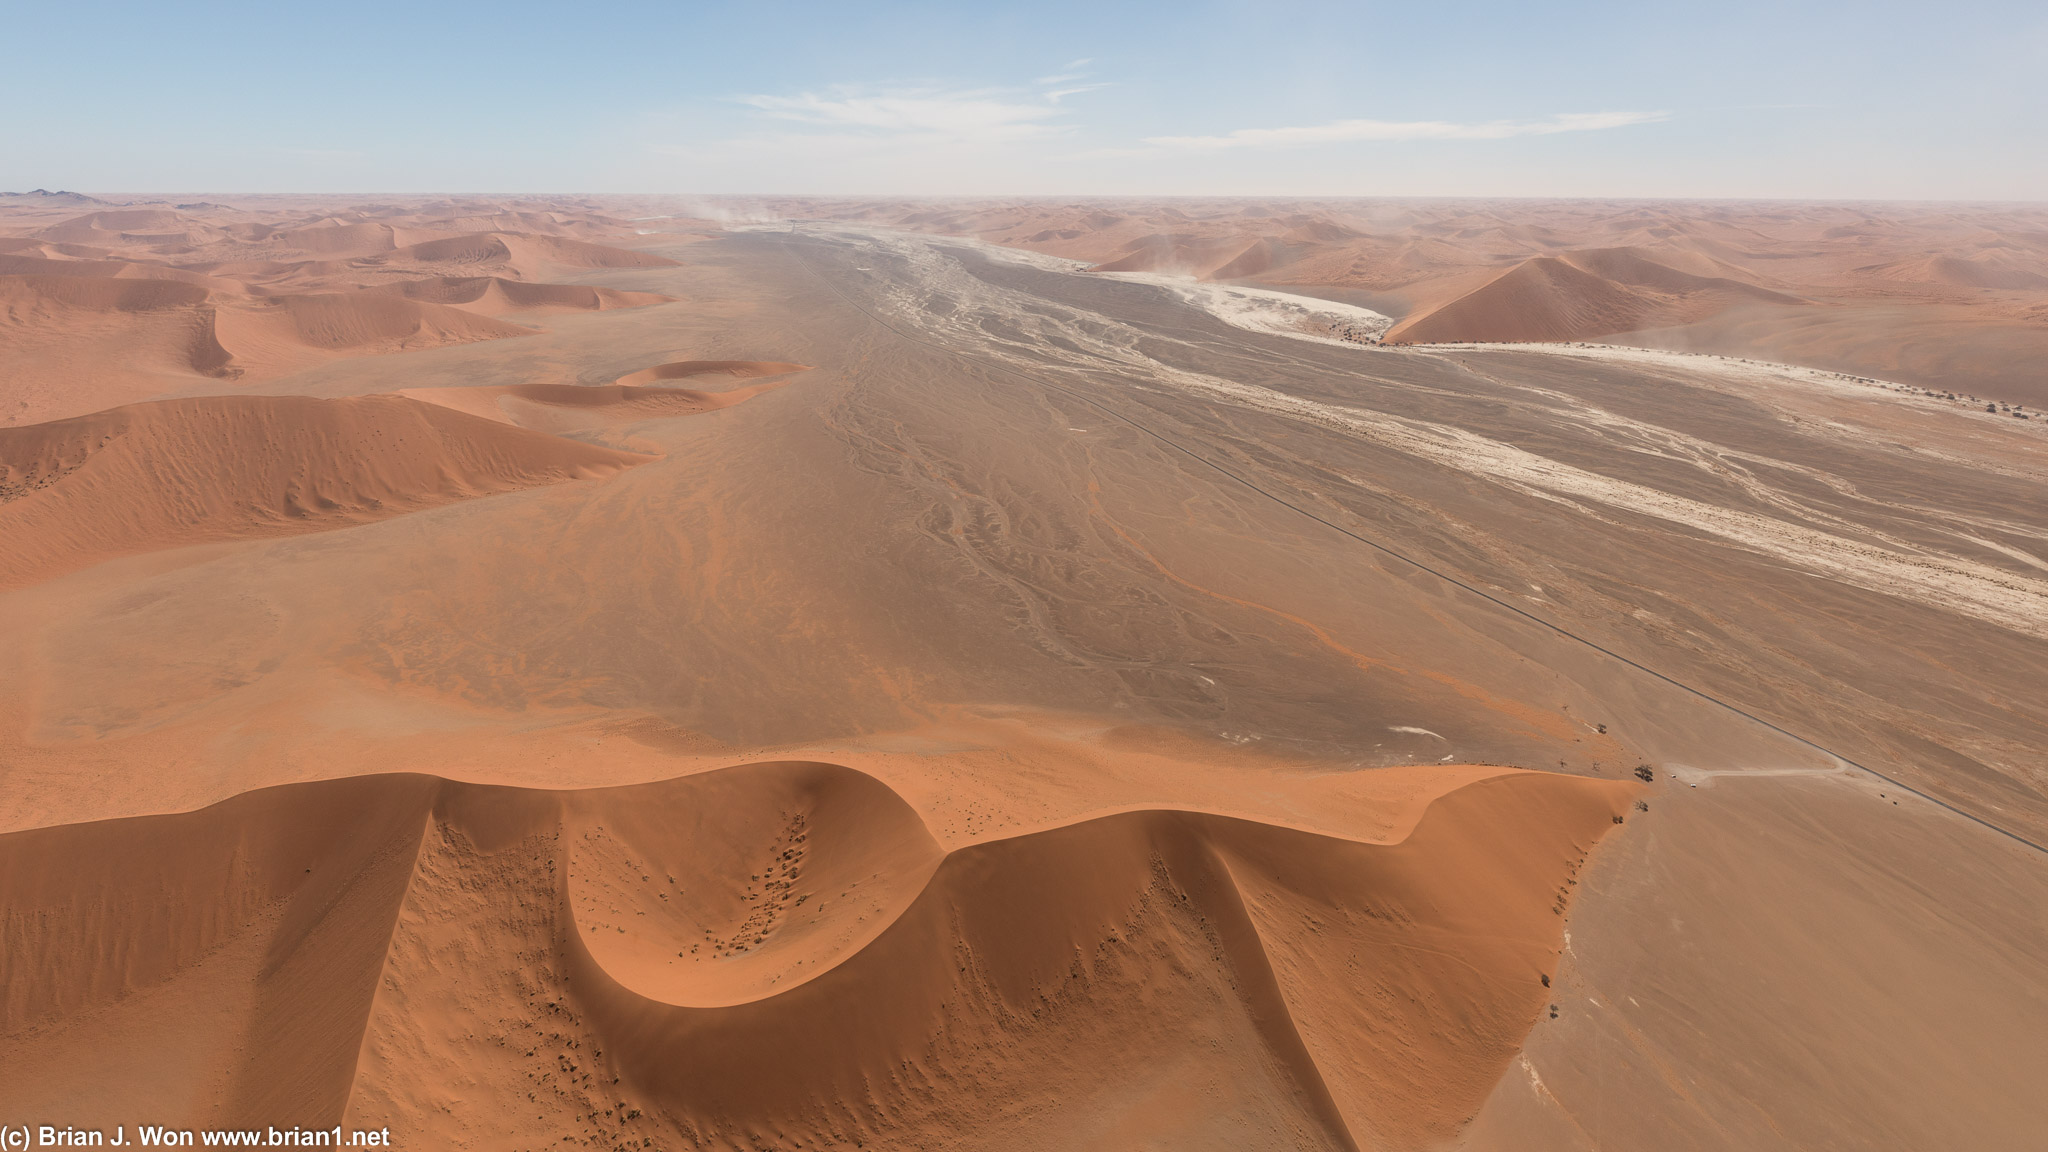 The big dish that is part of Dune 45 is invisible from the ground.